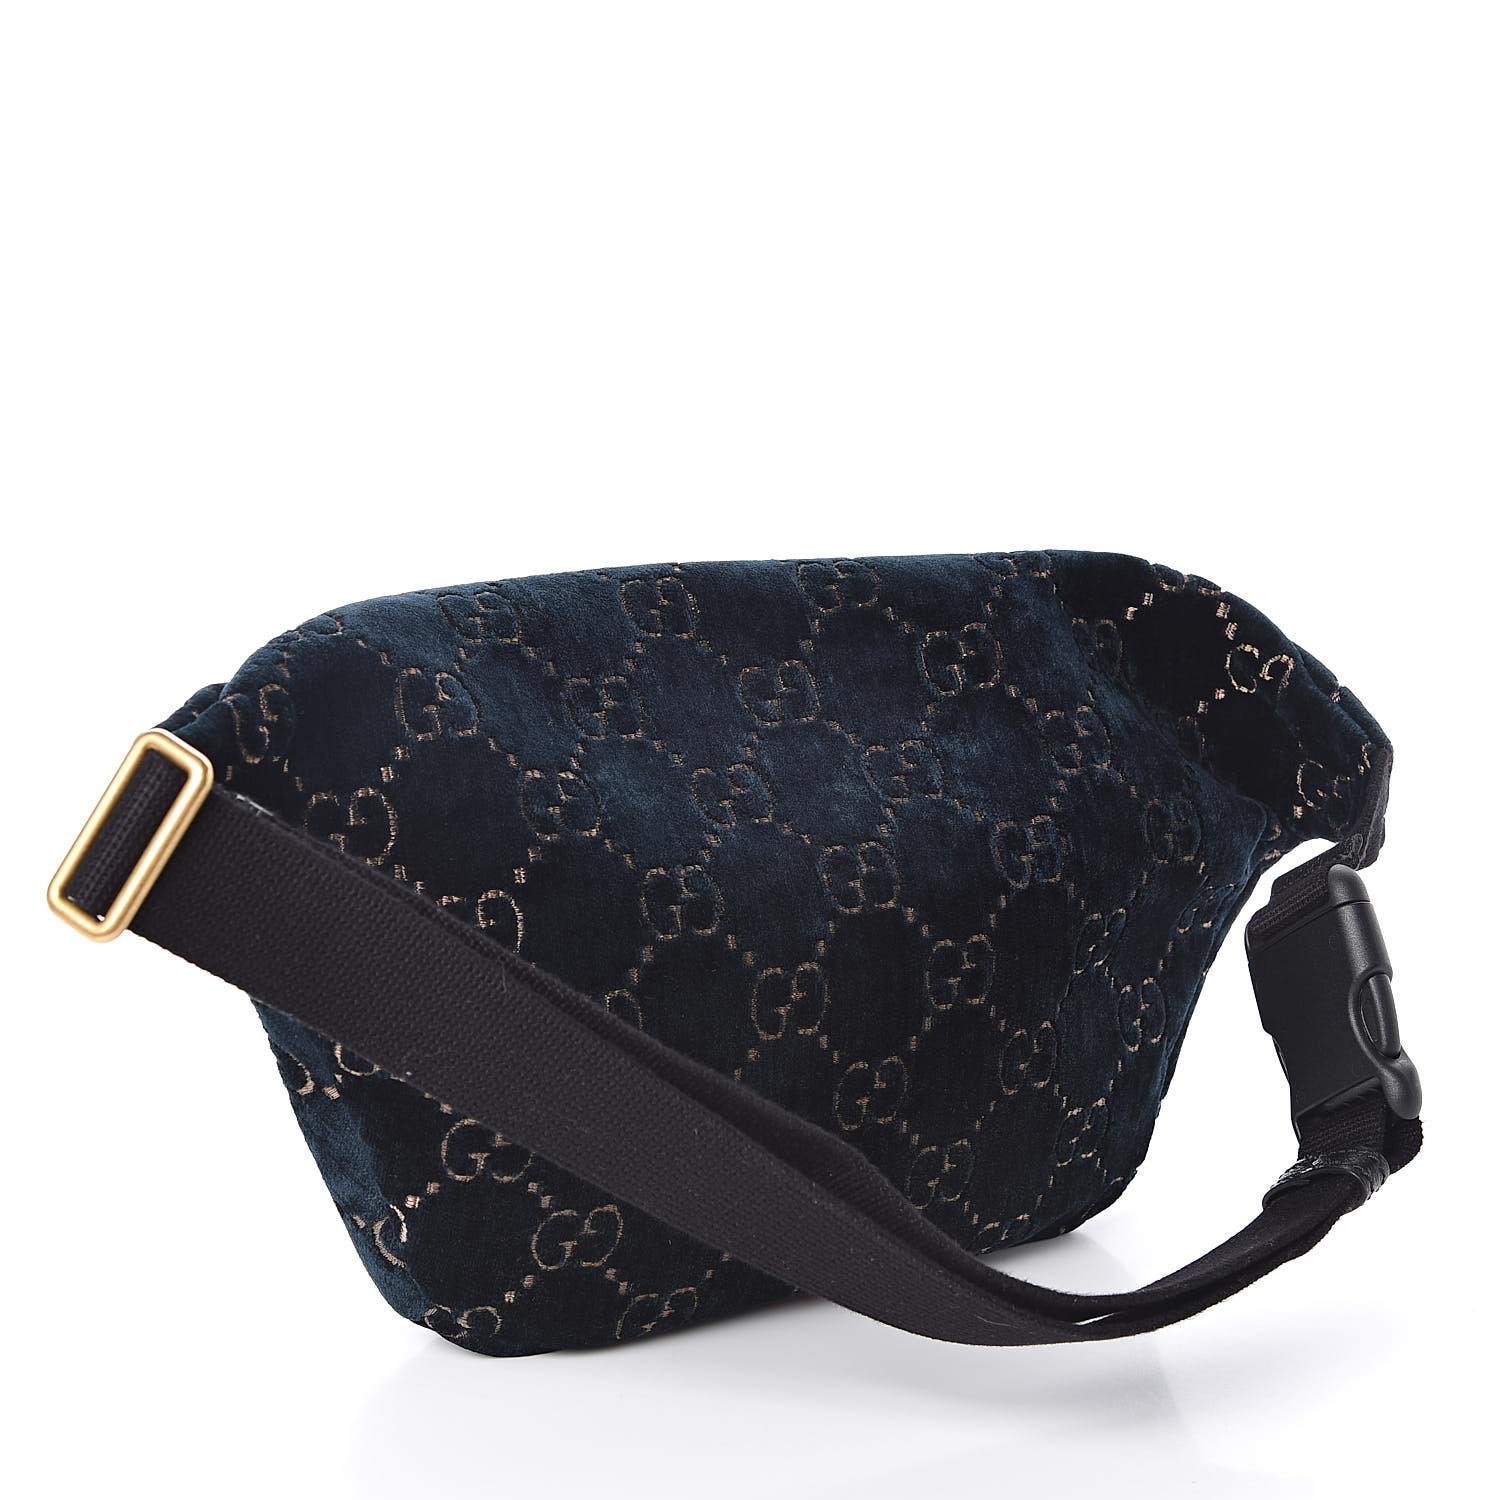 Authentic NWT Gucci GG Black Canvas Fabric Belt Waist Bag Fanny Pack